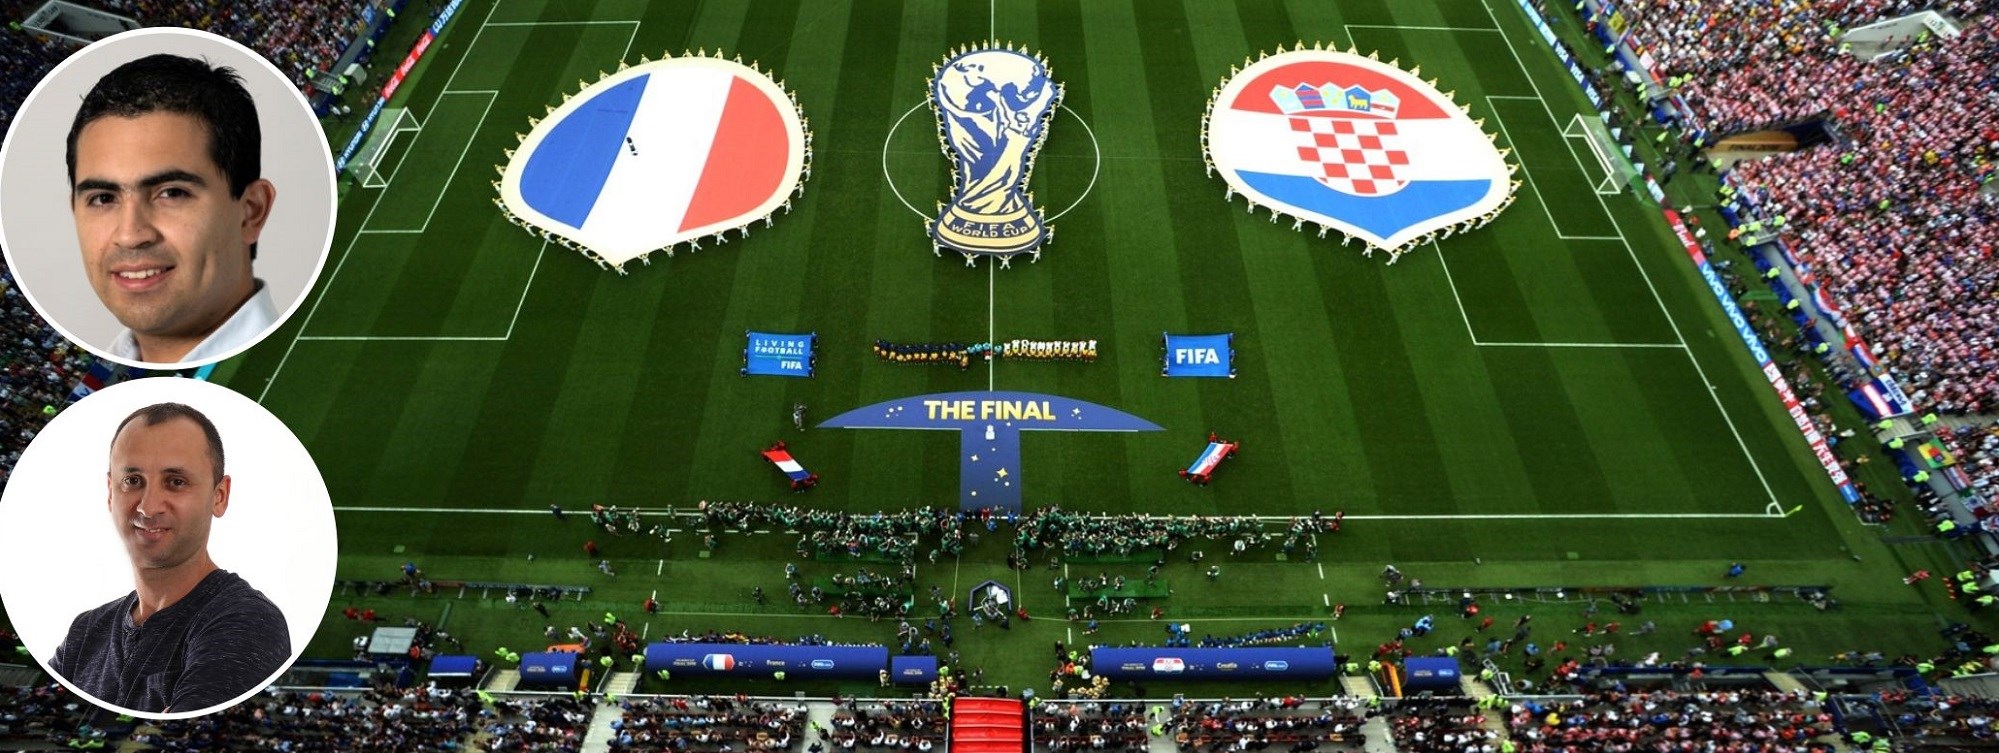 Since FIFA announced the 2026 World Cup is to feature 48 teams organized in 16 three-team groups, a lot of criticism has been raised by fans, media, and researchers, professors Mario Guajardo and Alexander Krumer write in Inside World Football. Photo: World Cup final in 2018 (Wikimedia)